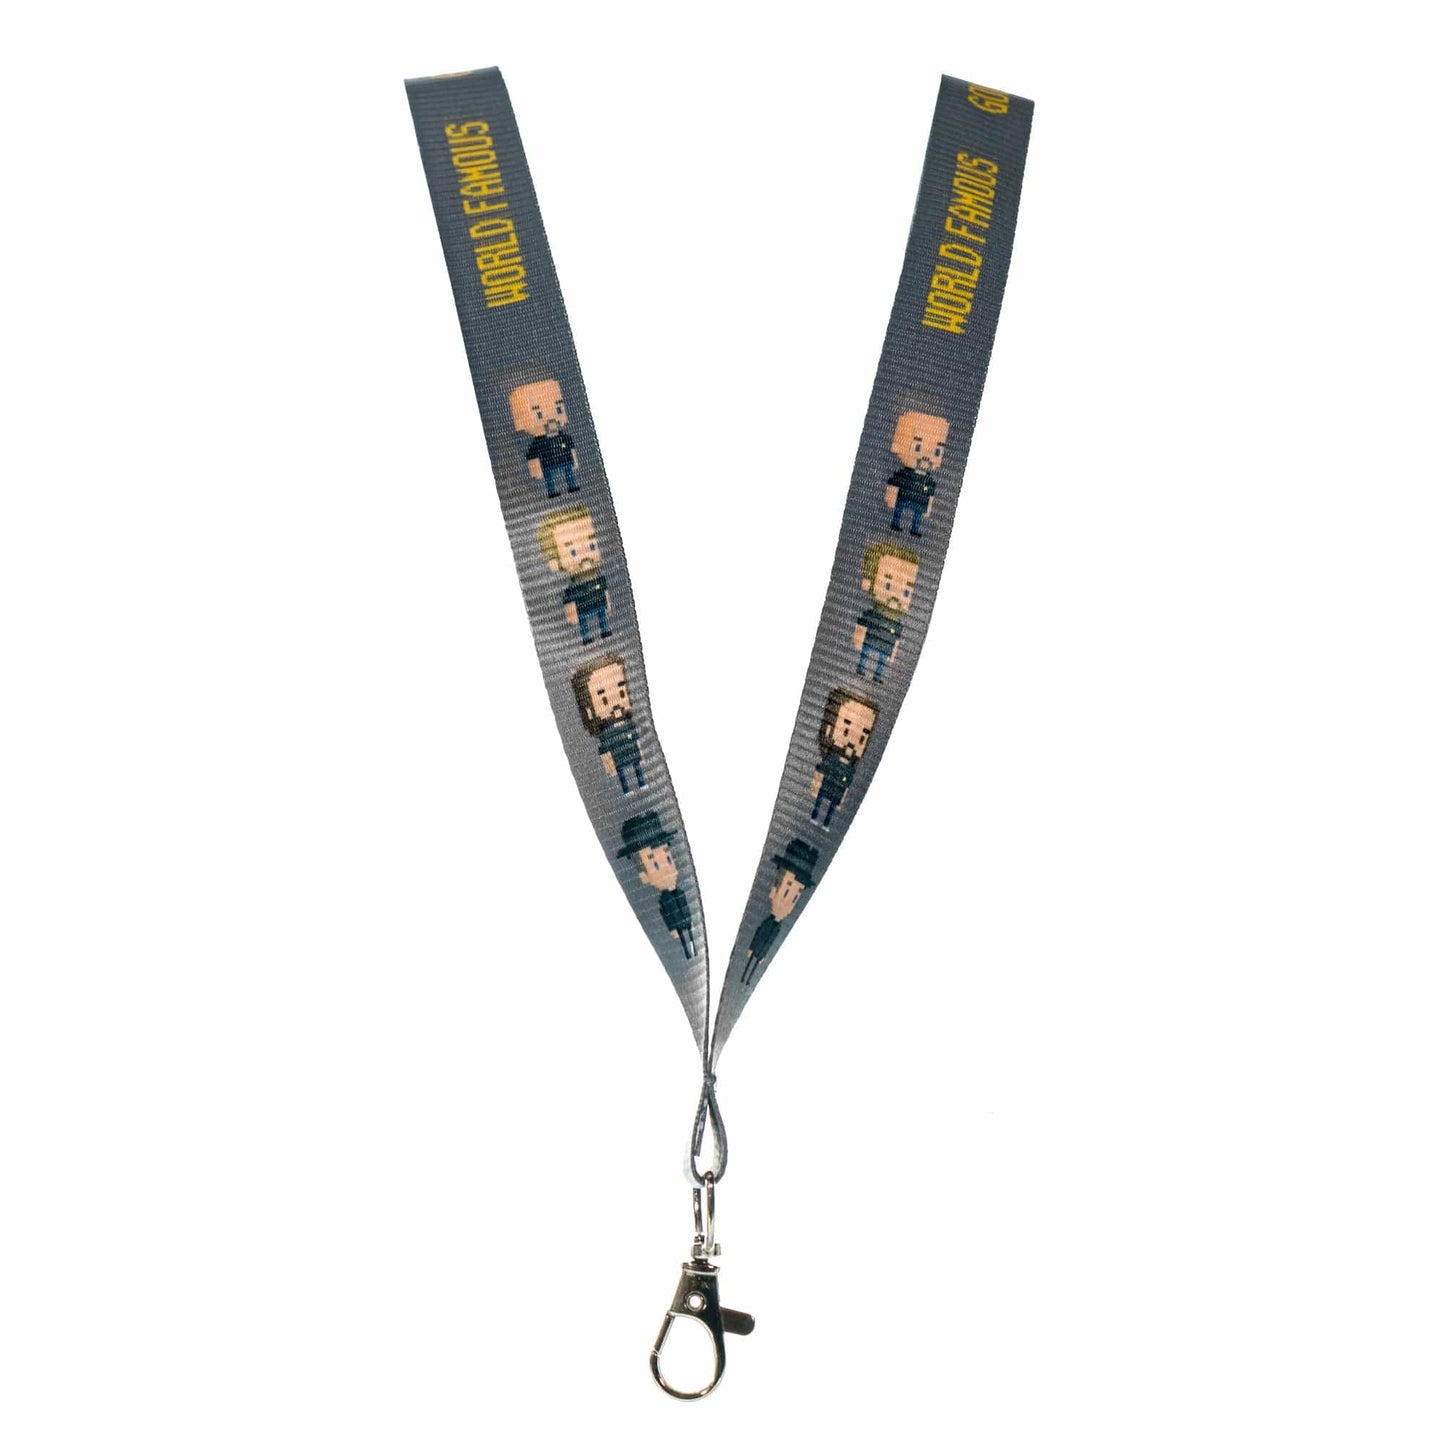 Gold & Silver Pawn Shop "The Guys" Lanyard ZOOM